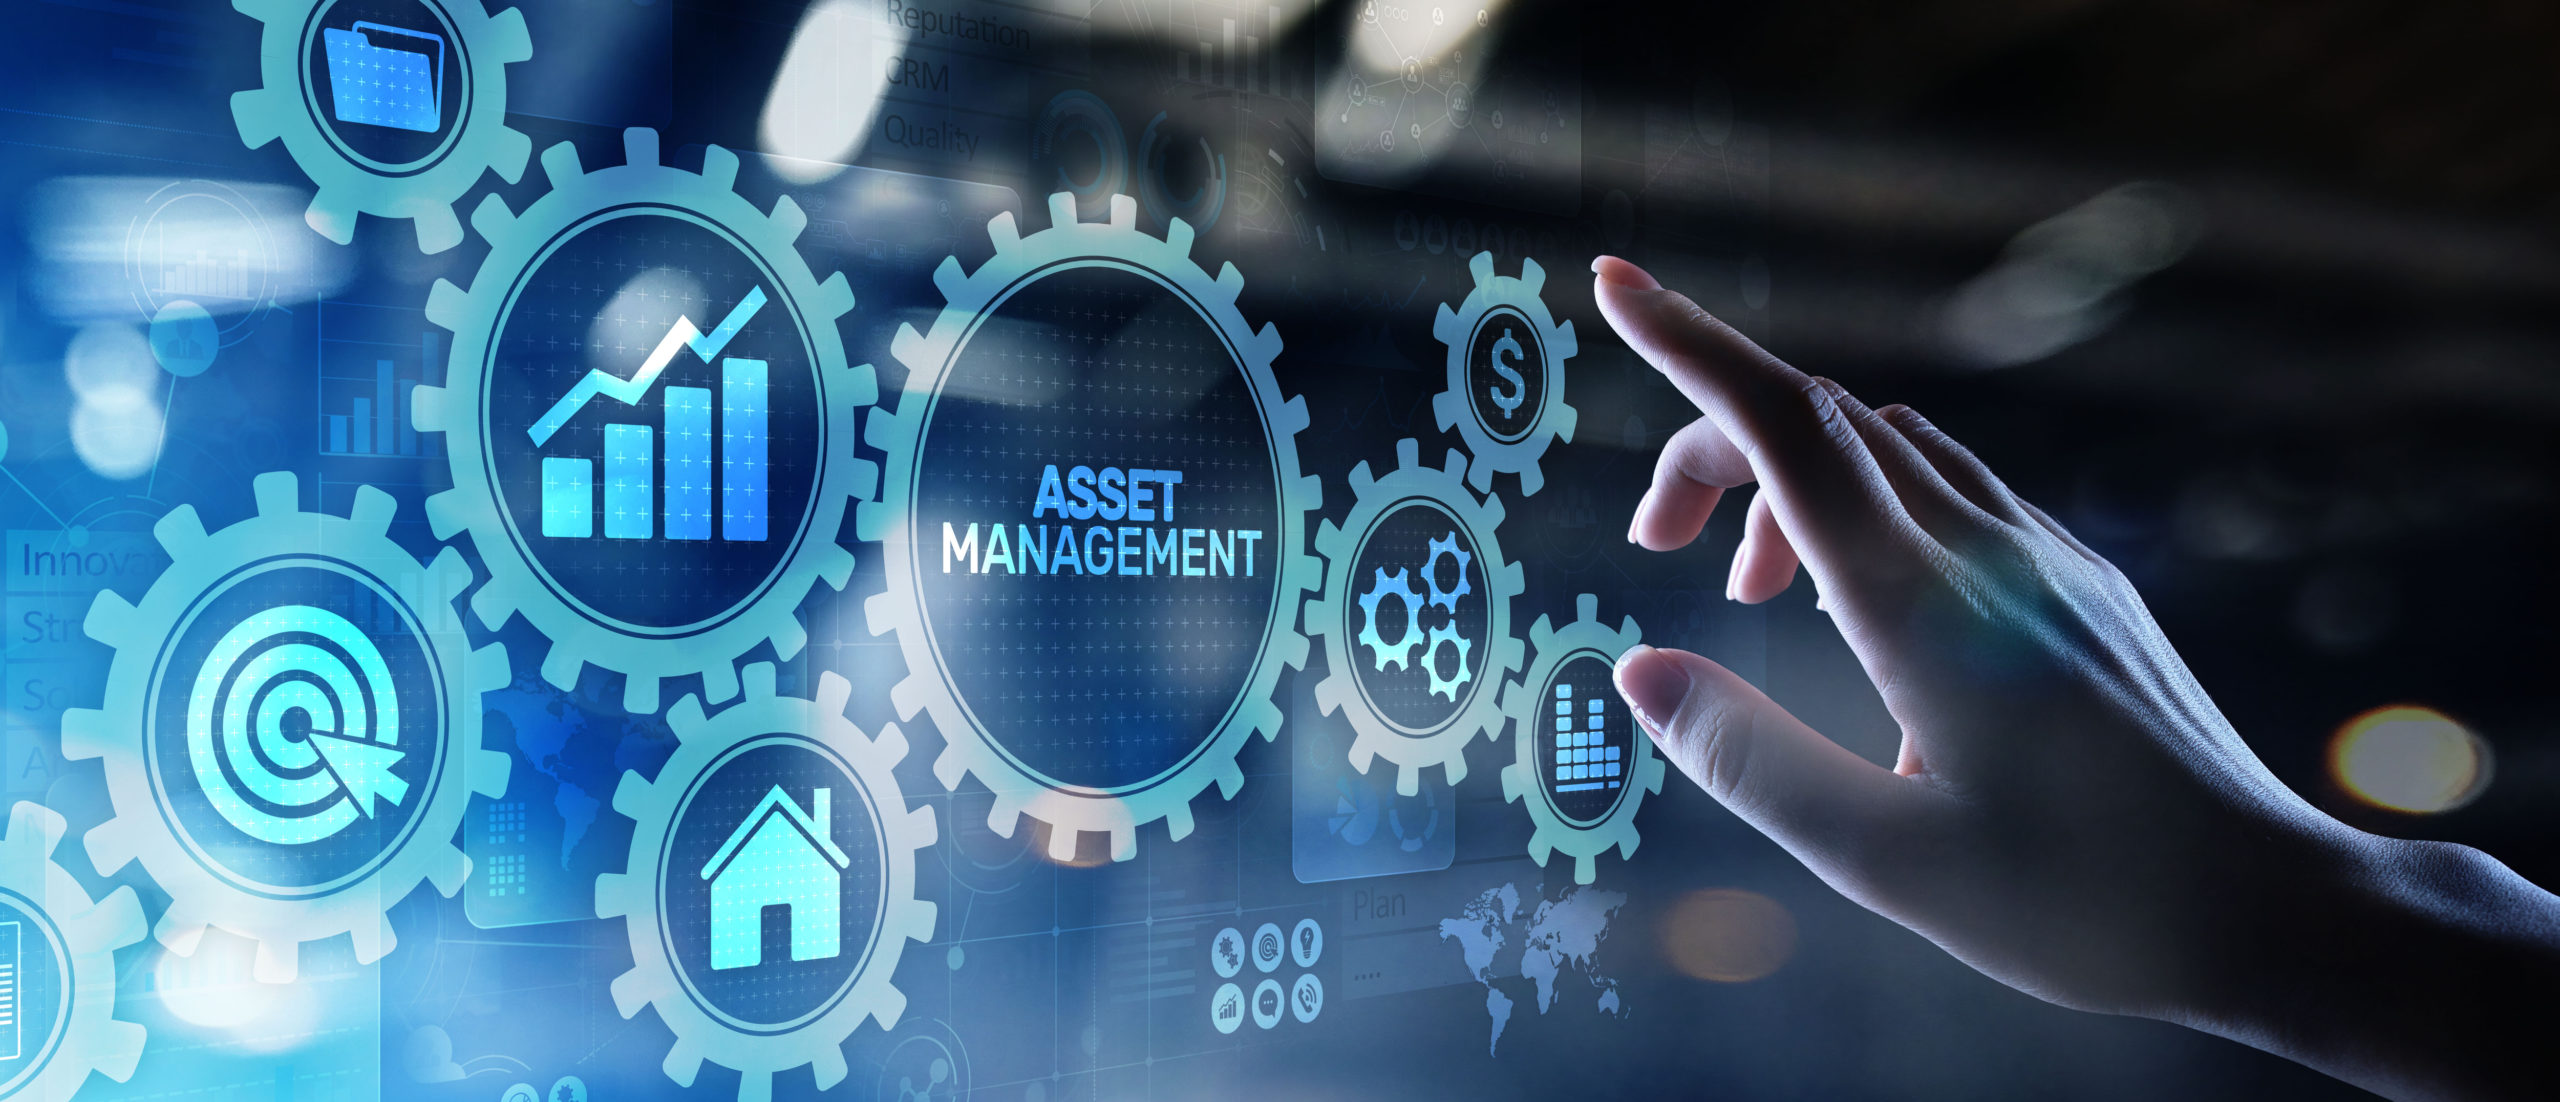 Asset Management Lake St. Louis, MO | Financial Planners | Investment Advisors | Wealth Management